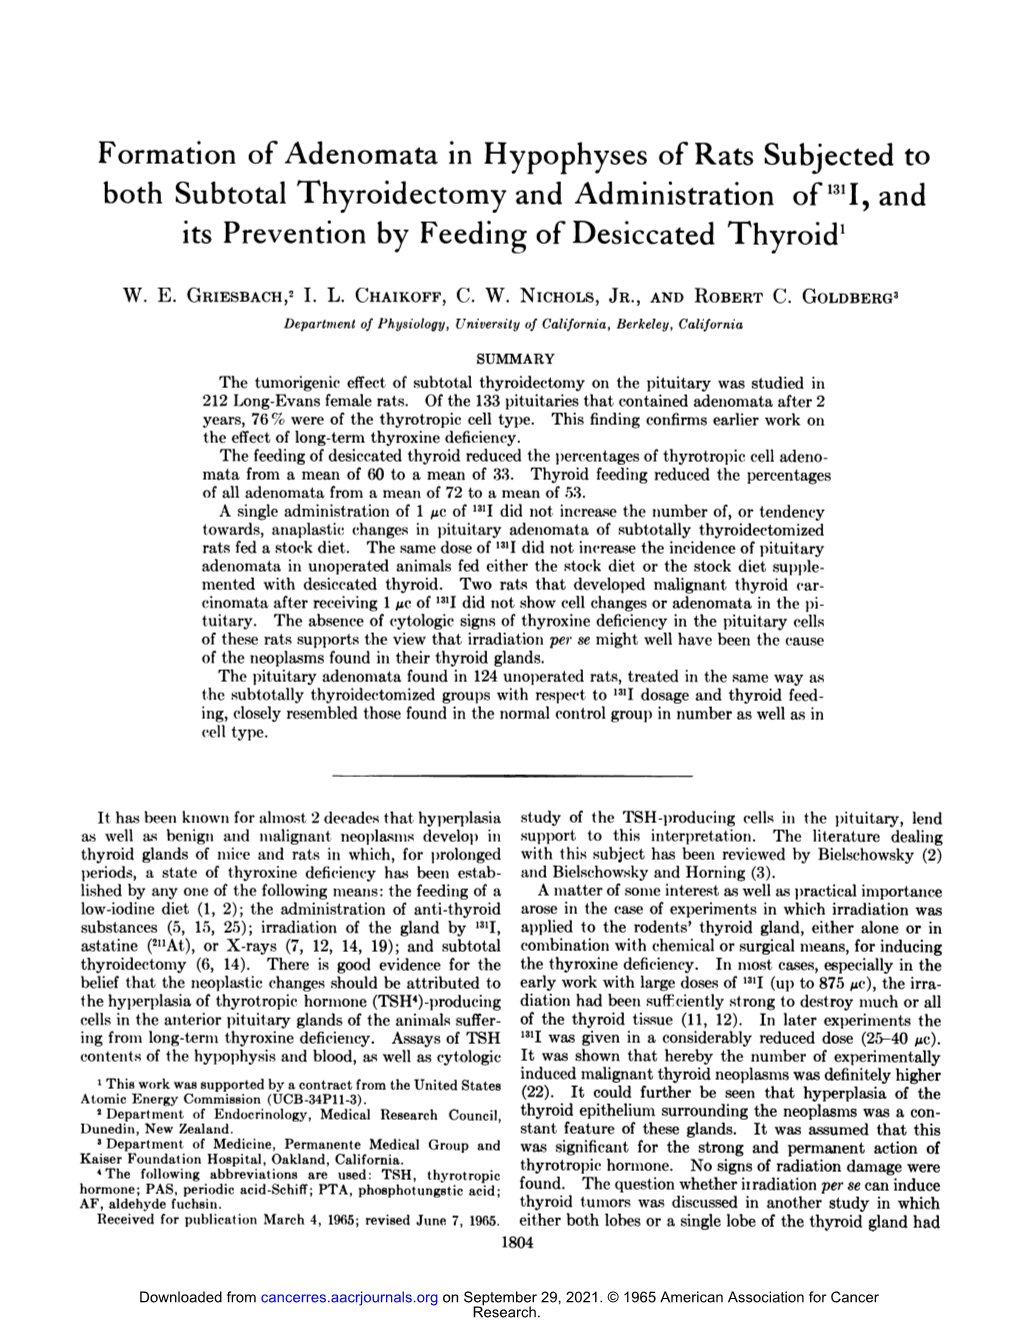 Formation of Adenomata in Hypophyses of Rats Subjected to Both Subtotal Thyroidectomy and Administration Of'311,And Its Preventi